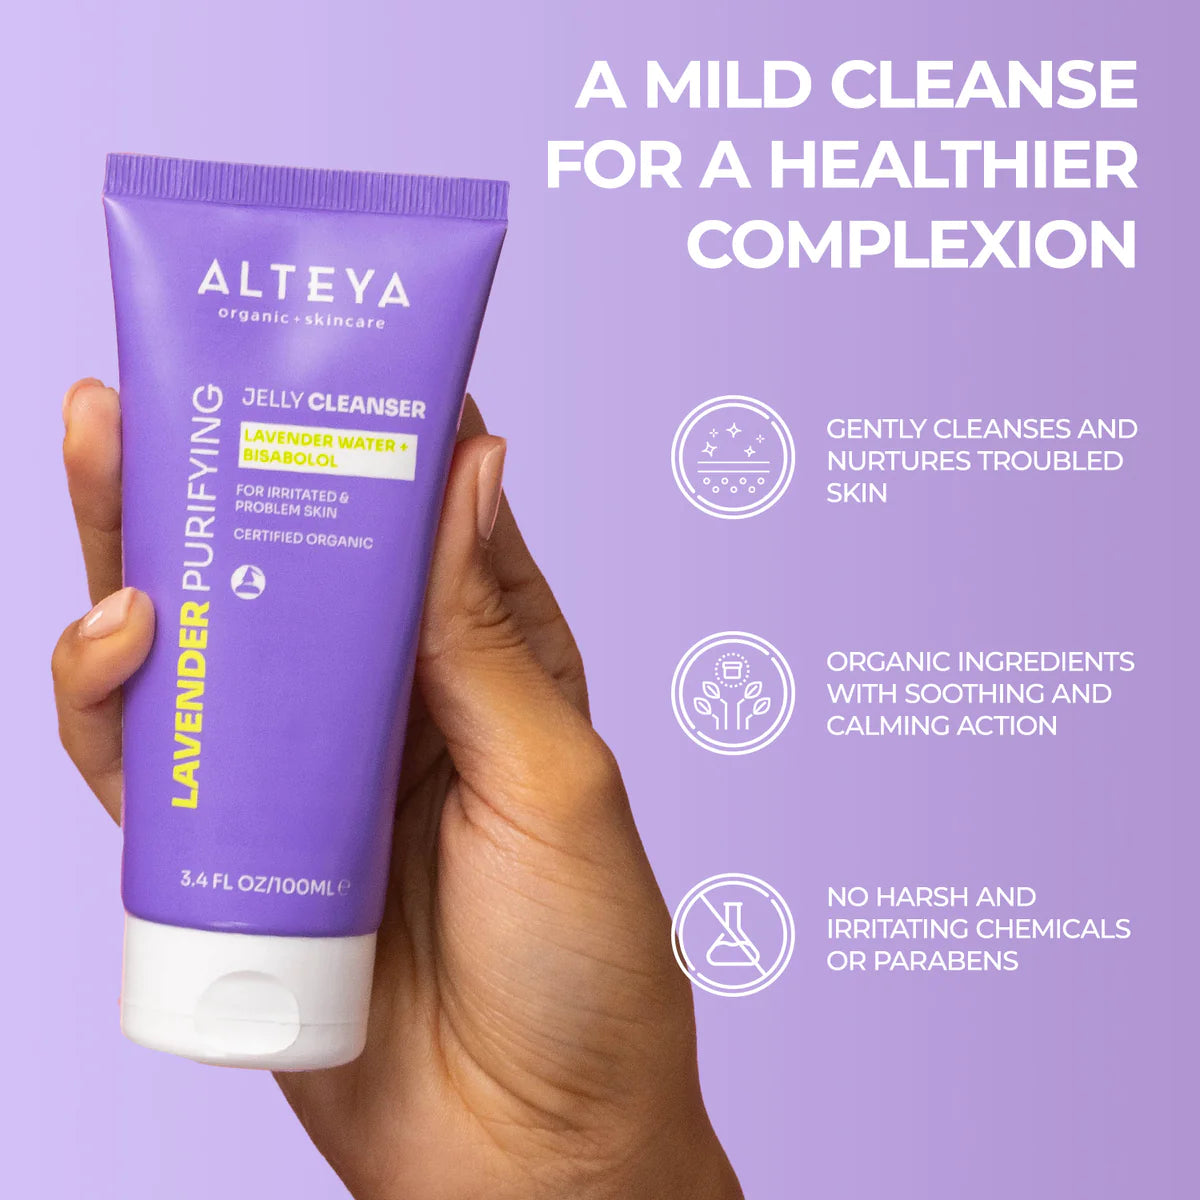 A hand holding a bottle of Alteya Organics' Lavender Purifying Jelly Cleanser for a healthier complexion.